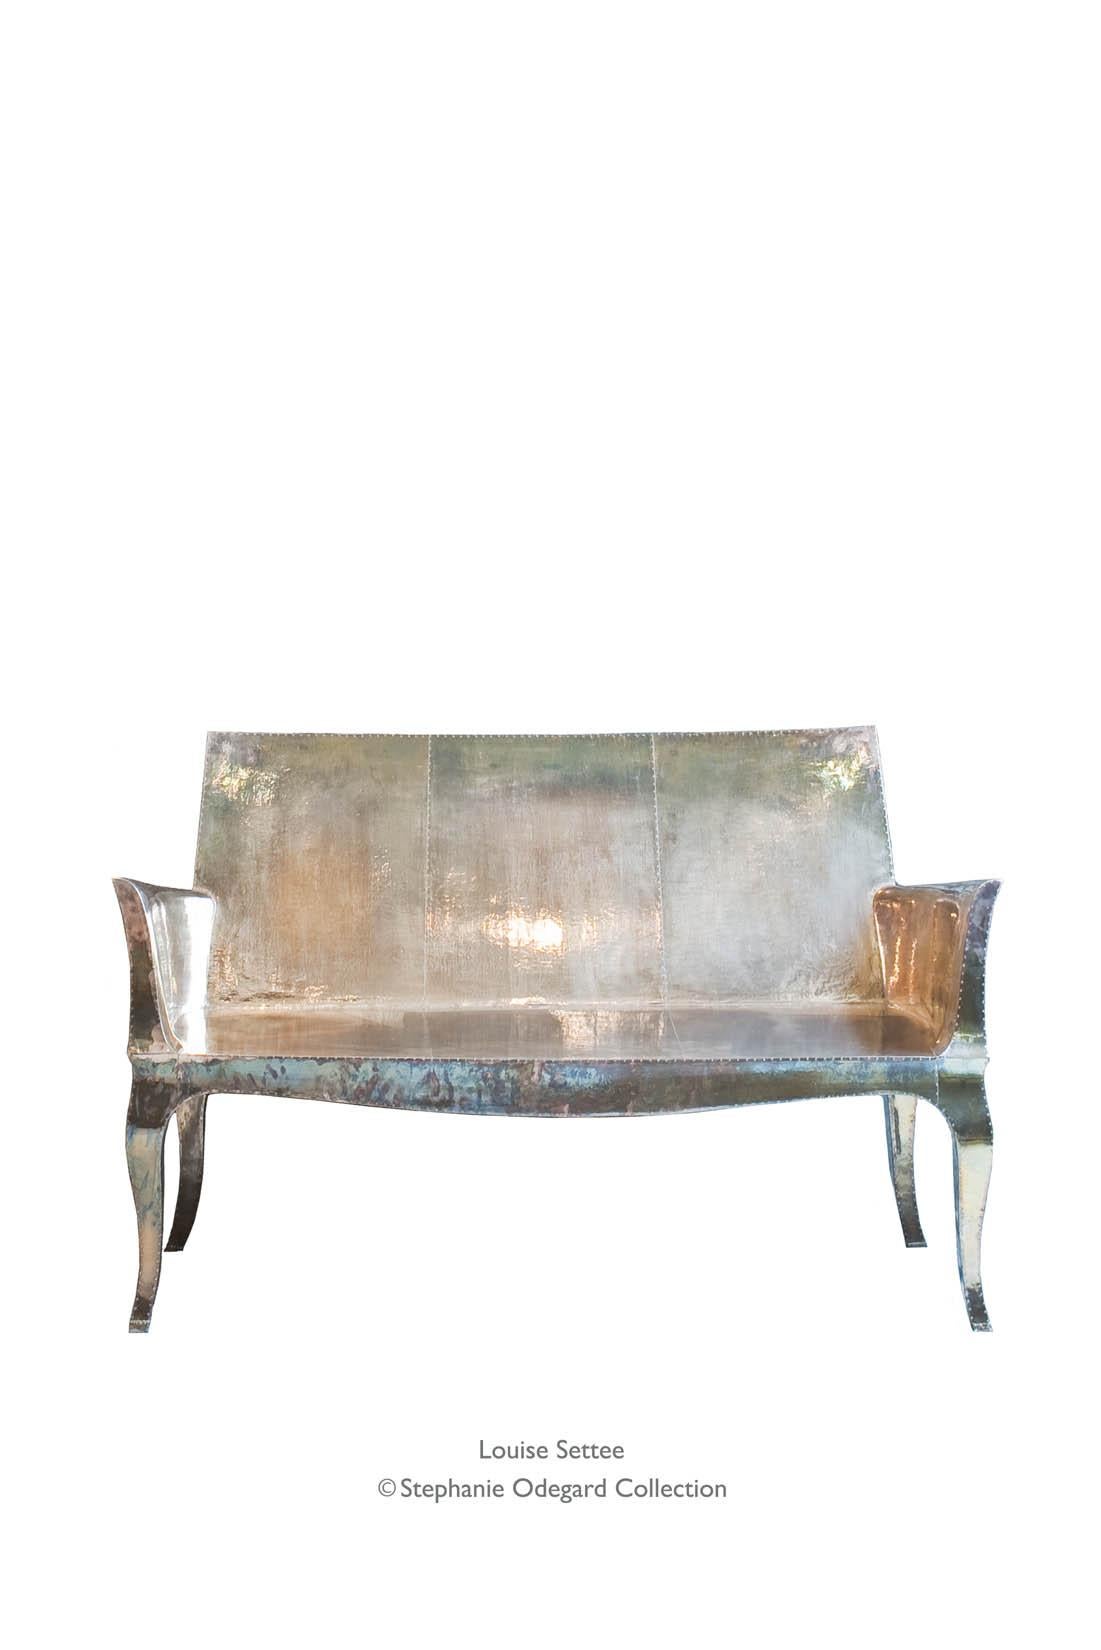 Louise Settee Art Deco Benches in Mid. Hammered Brass by Paul Mathieu For Sale 6